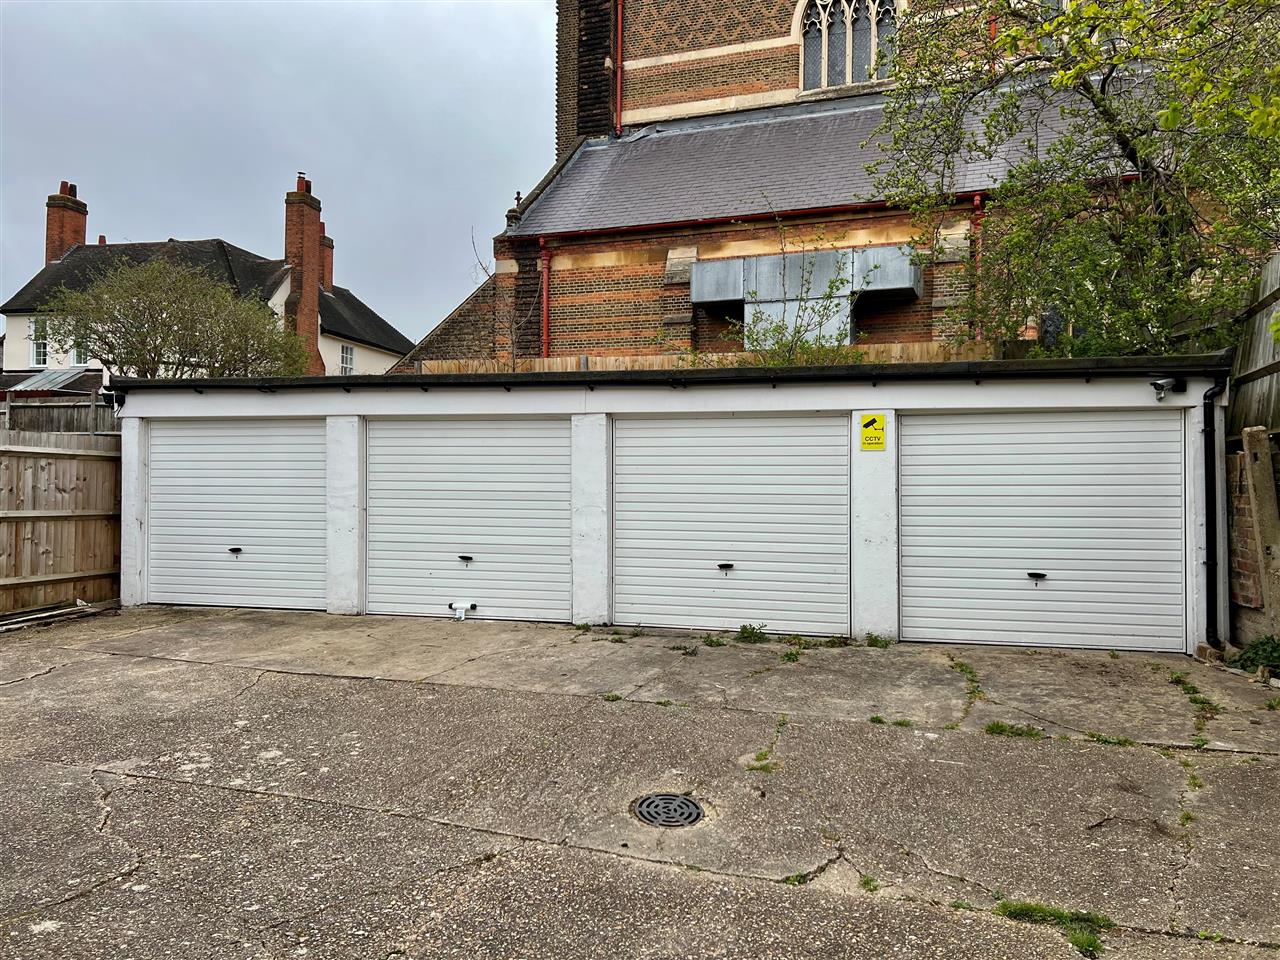 A rare opportunity to acquire a garage on a long lease at the rear of a small low rise purpose built block situated in a sought after location within close proximity to Tufnell Park (Northern Line) underground station as well as the open space of Parliament Hill Fields and the fashionable ...